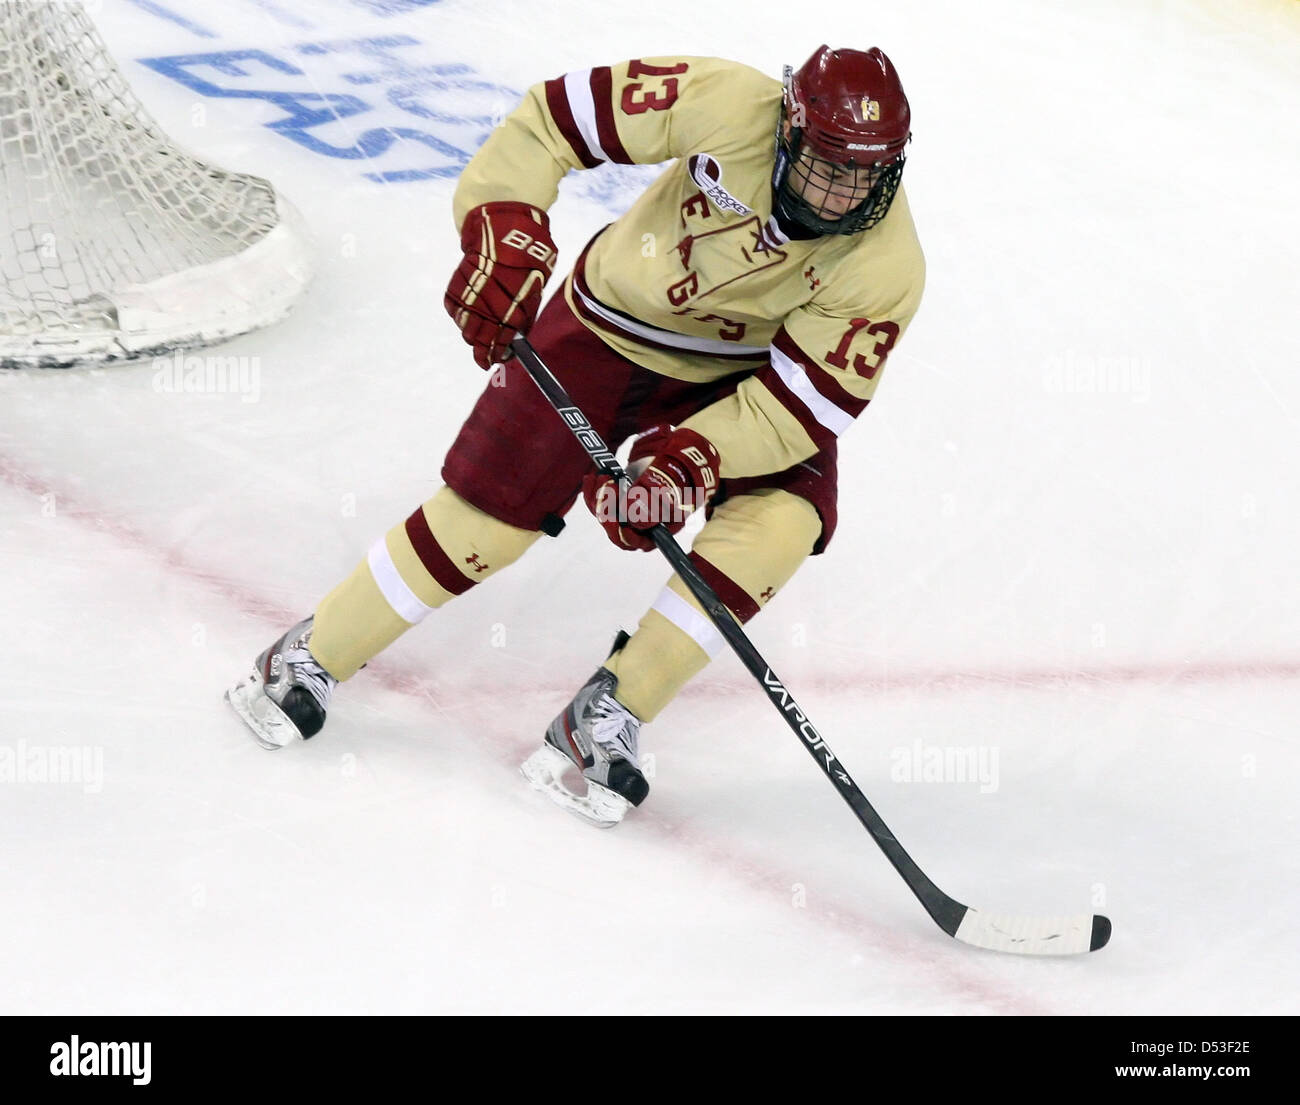 March 22, 2013 - Boston, Massachusetts, United States - Boston College  Eagles forward Johnny Gaudreau (13) collides with Boston University  Terriers forward Danny O'Regan (10) during the first period of the Hockey